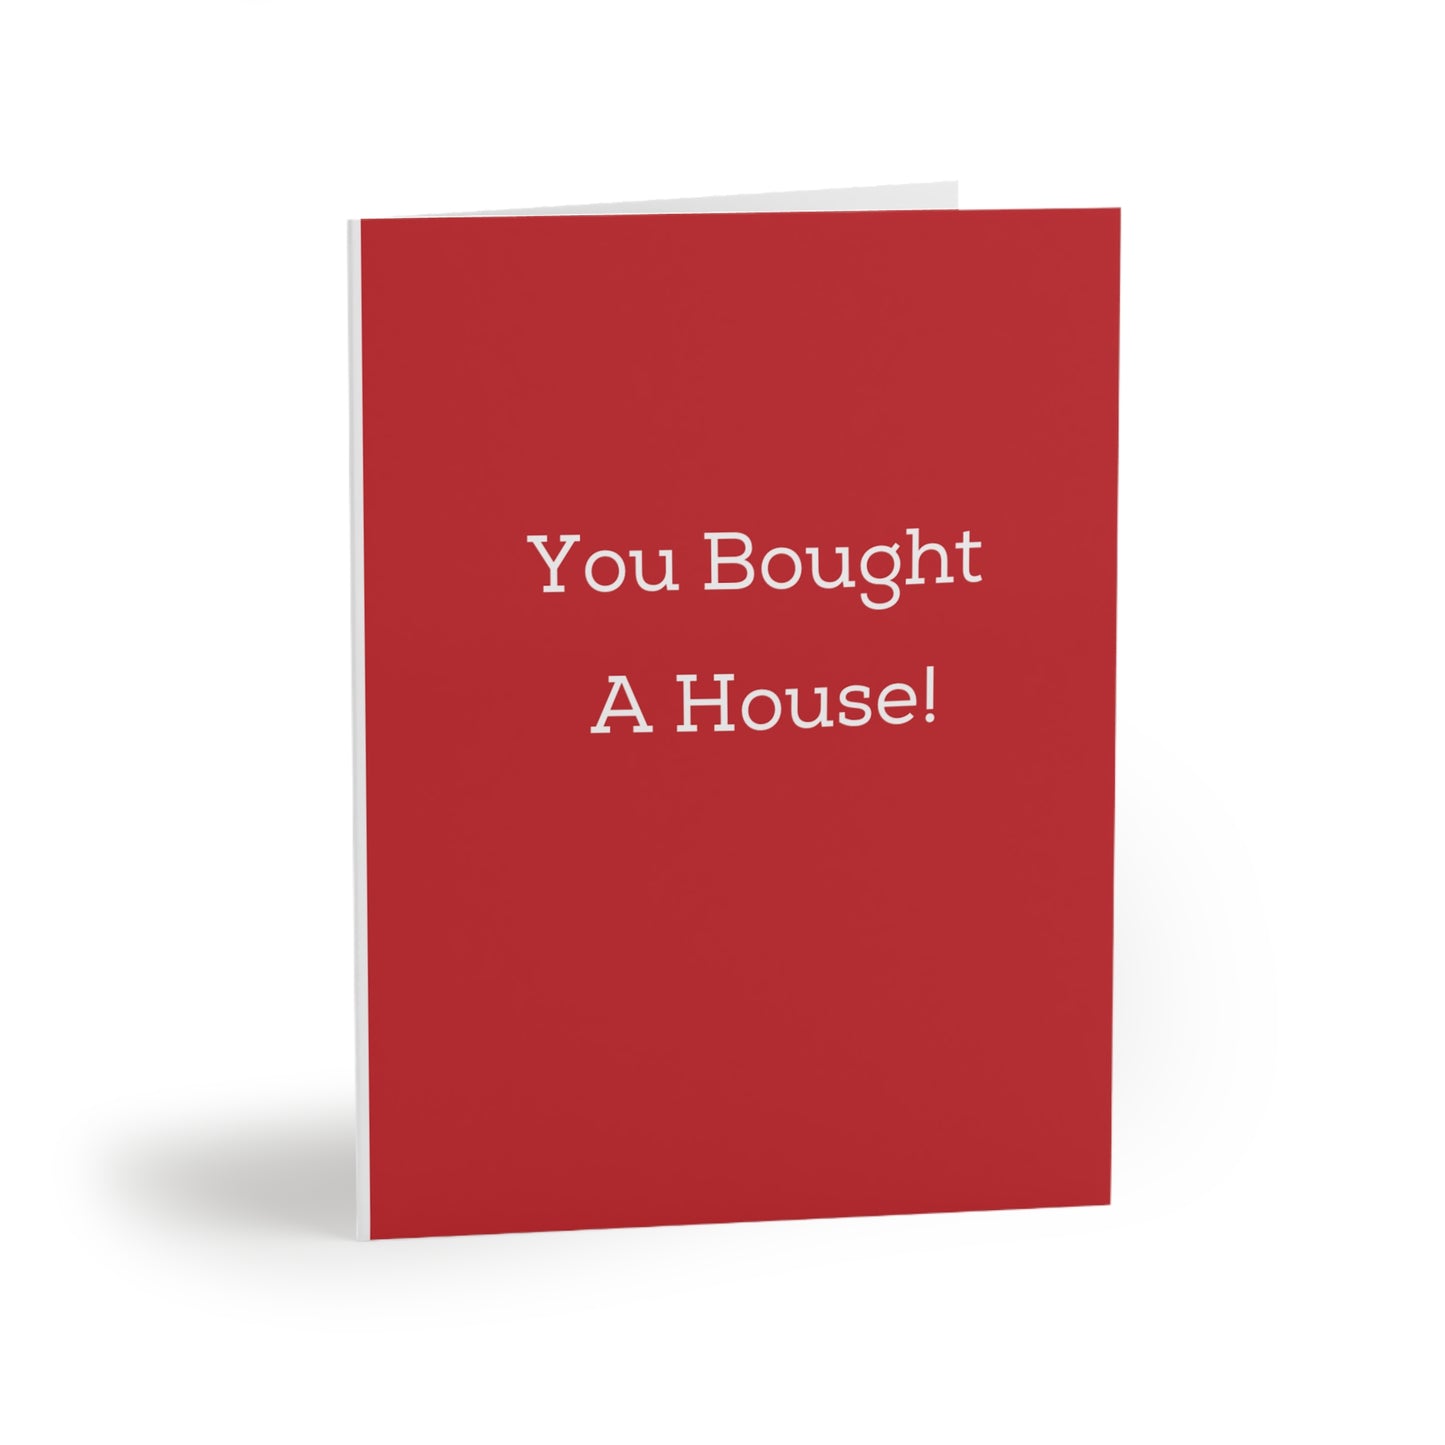 "You Bought a House" RED - Cards for Real Estate Agents (8, 16, and 24 pcs)